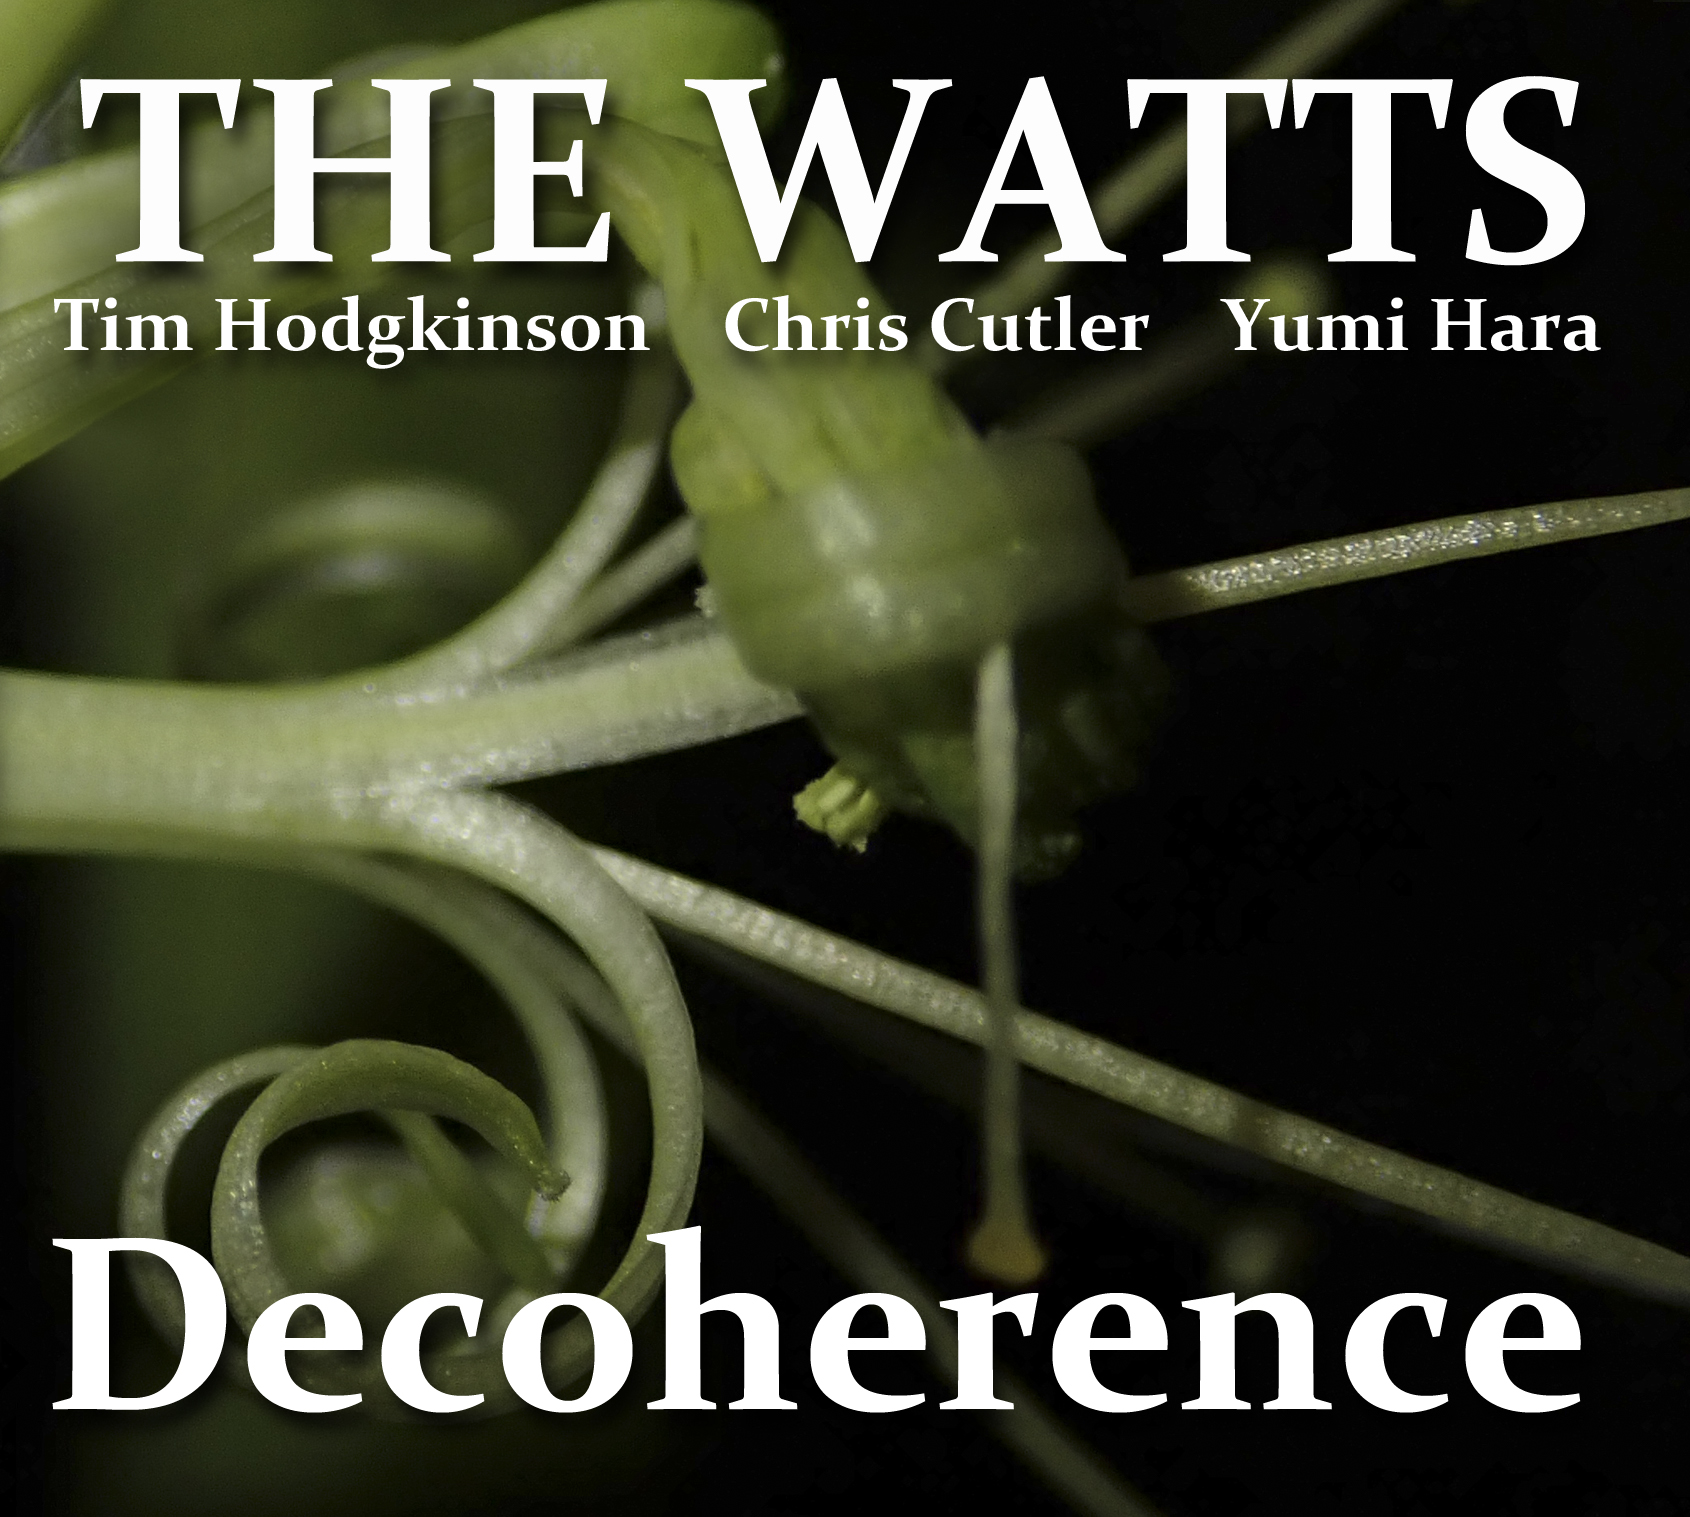 THE WATTS Decoherence